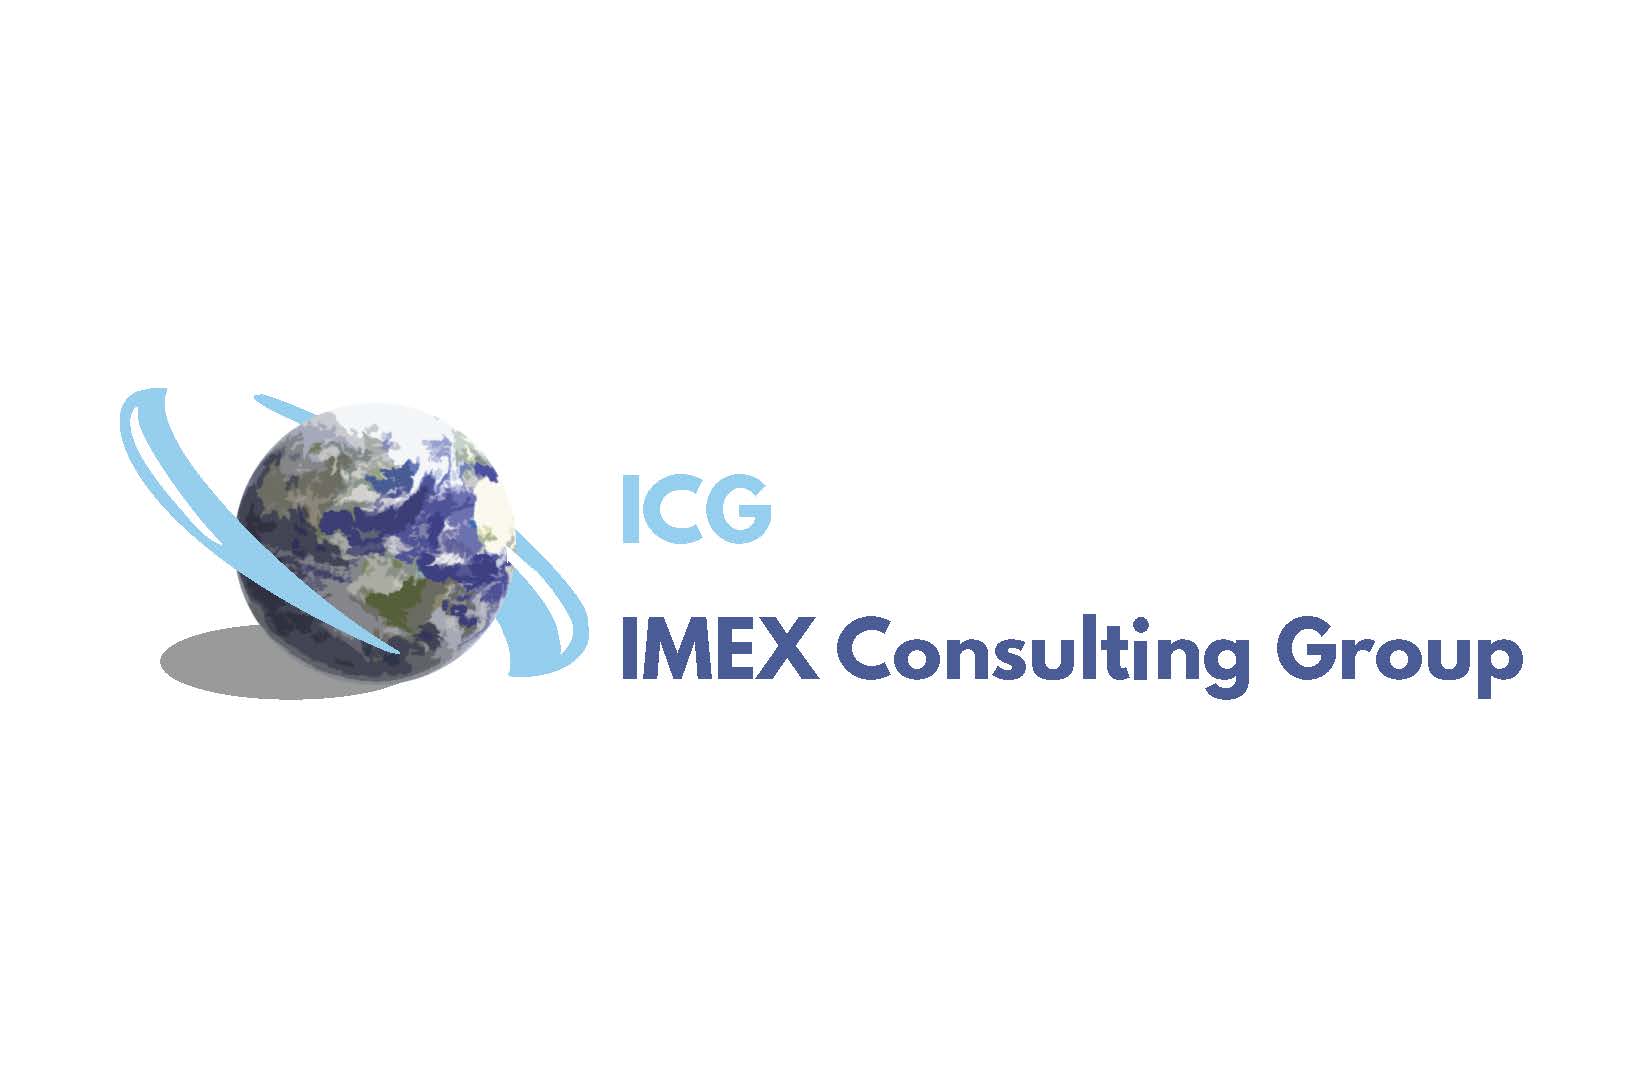 IMEX Consulting Group - Water/Wastewater/Sewage Treatment